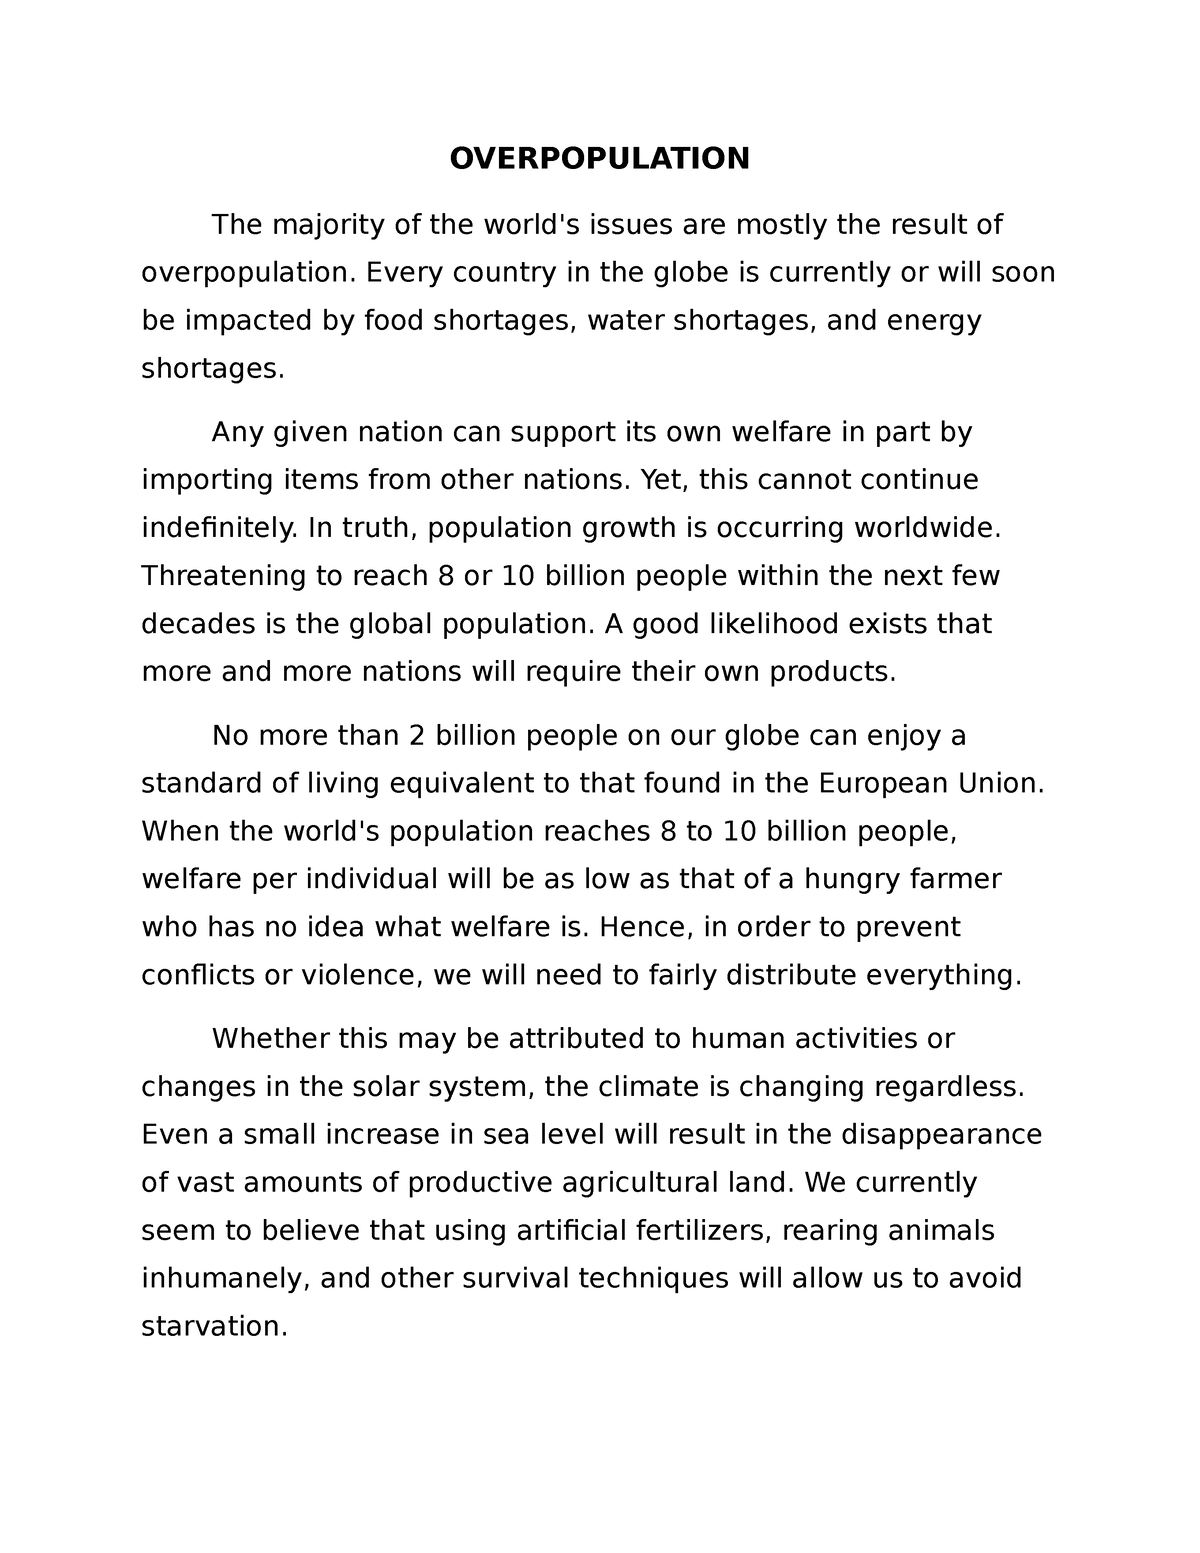 essay about overpopulation brainly